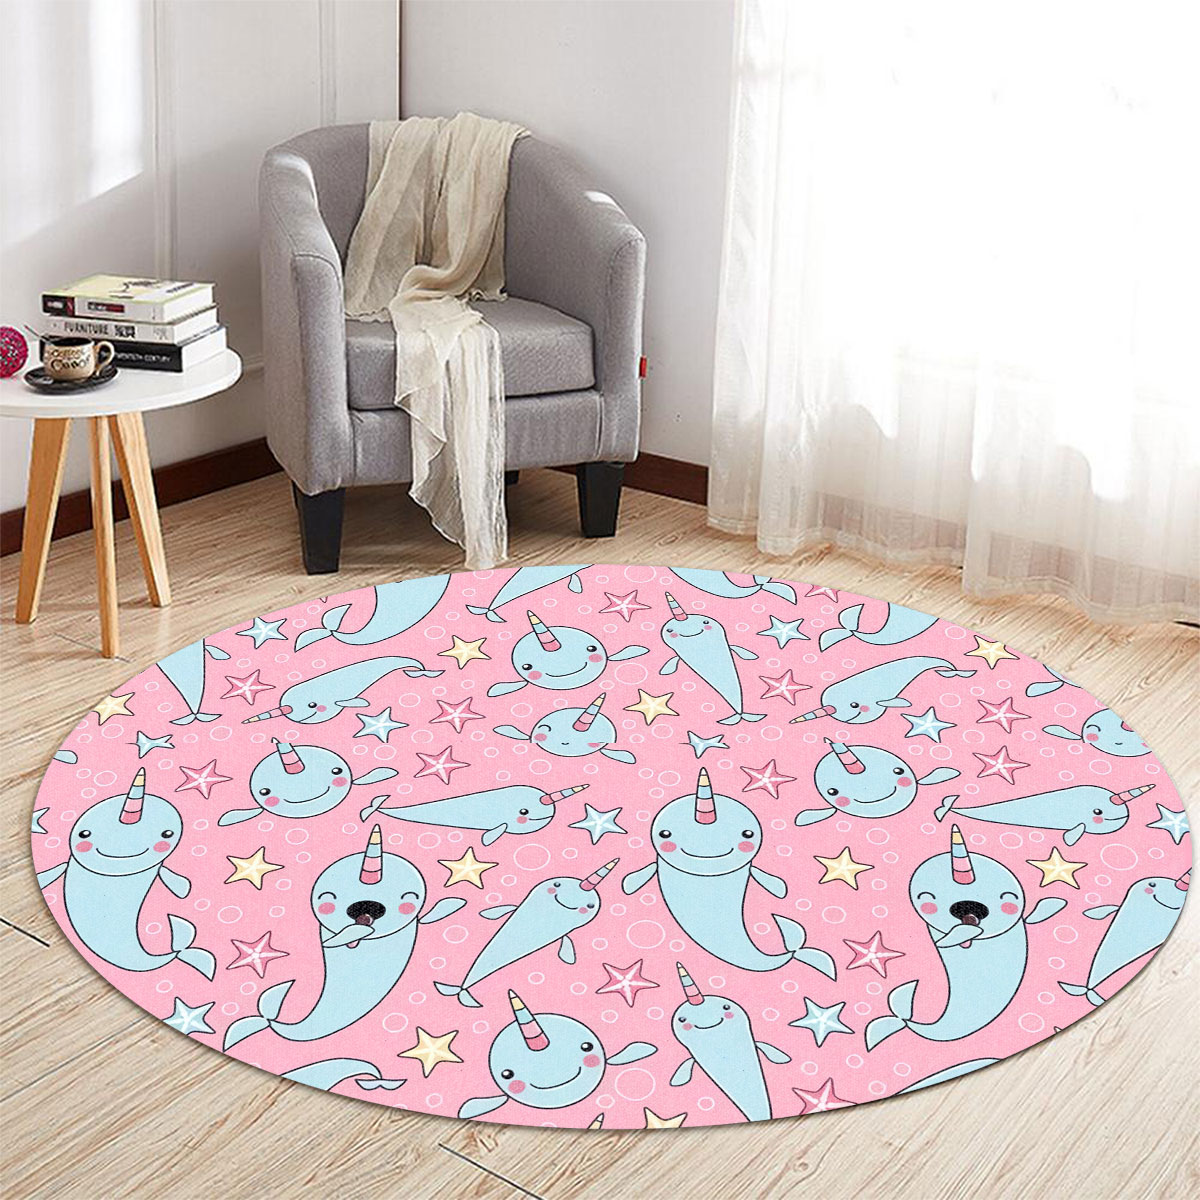 Cartoon Narwhal Pink Bubble Round Carpet